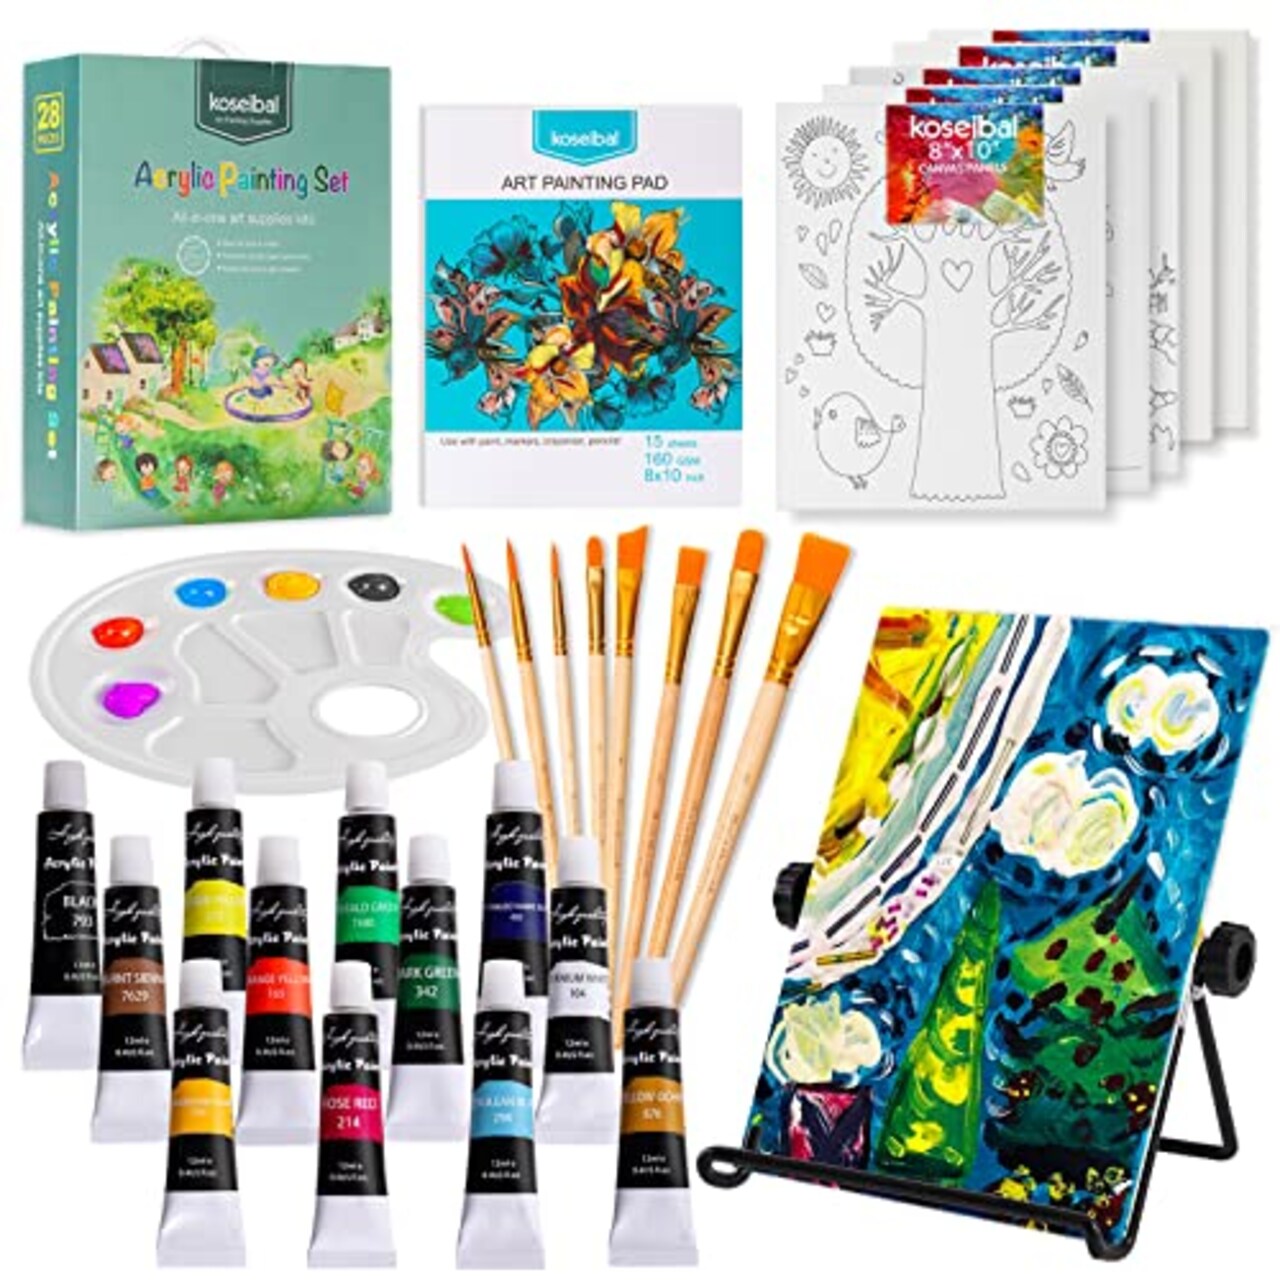 Koseibal Acrylic Paint Set for Kids, Art Painting Supplies Kit with 12  Paints, 5 Canvas Panels, 8 Brushes, Table Easel, Etc, Premium Paint Set for  Students, Artists and Beginner.